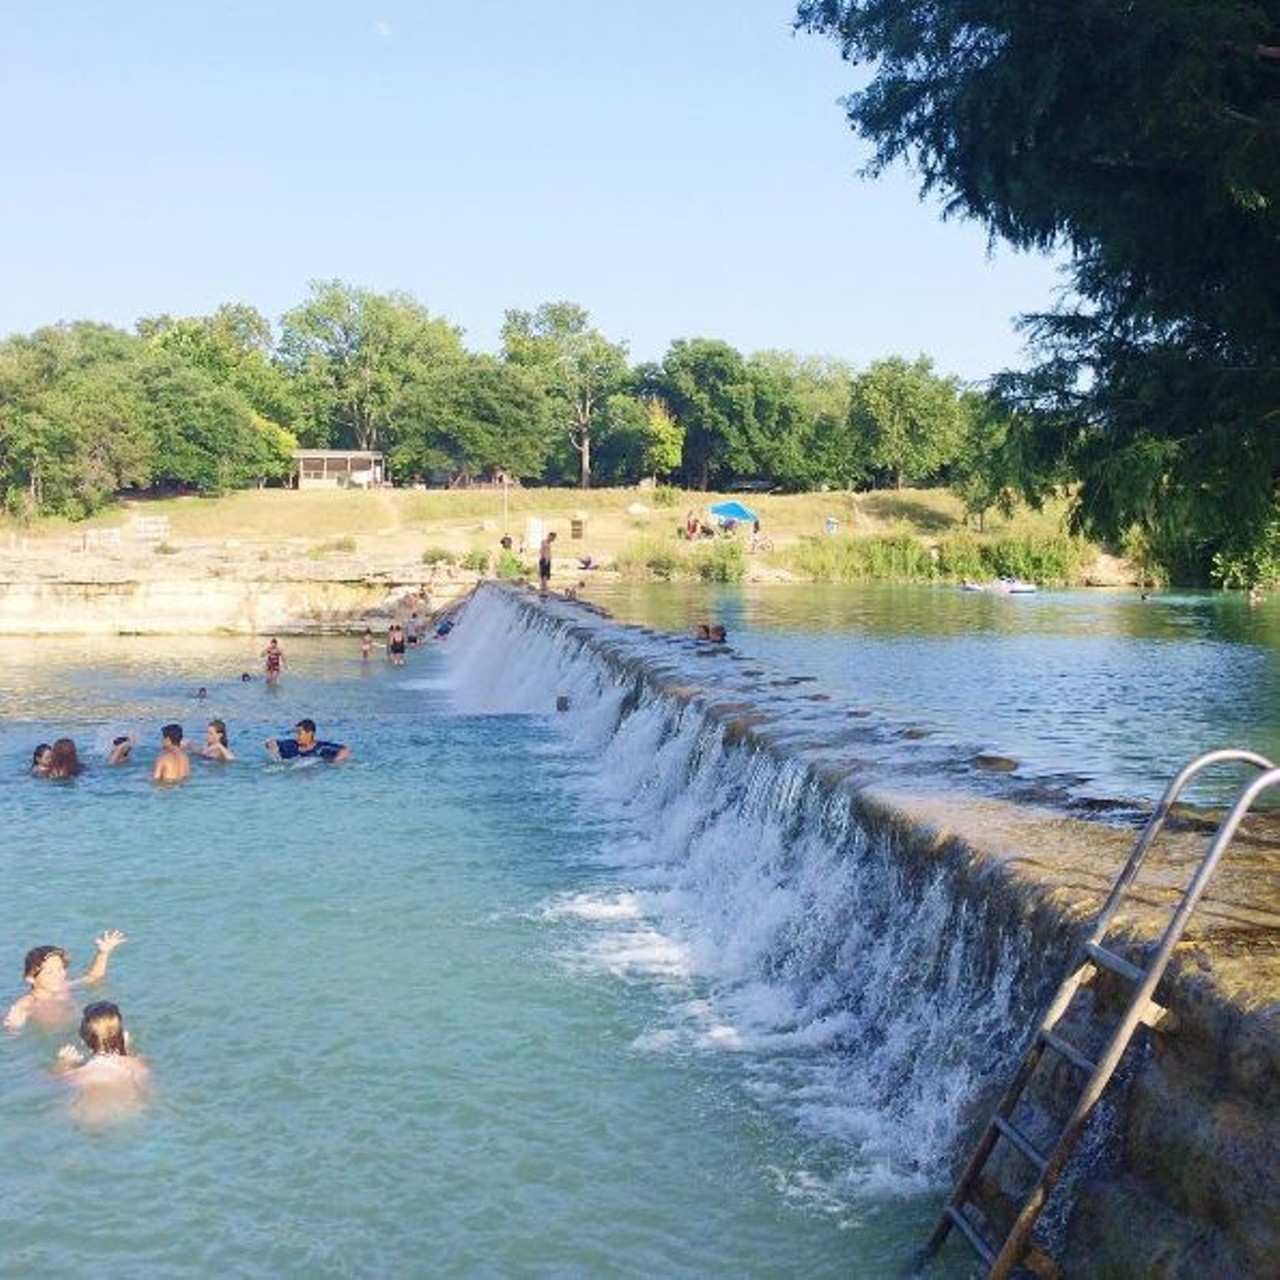 Blanco State Park
101 Park Road 23, Blanco, (830) 833-4333, tpwd.texas.gov/state-parks/blanco
There&#146;s enough water for days, but your trip won&#146;t be complete without a few hours of swimming.
Photo via Instagram, pj_dunn